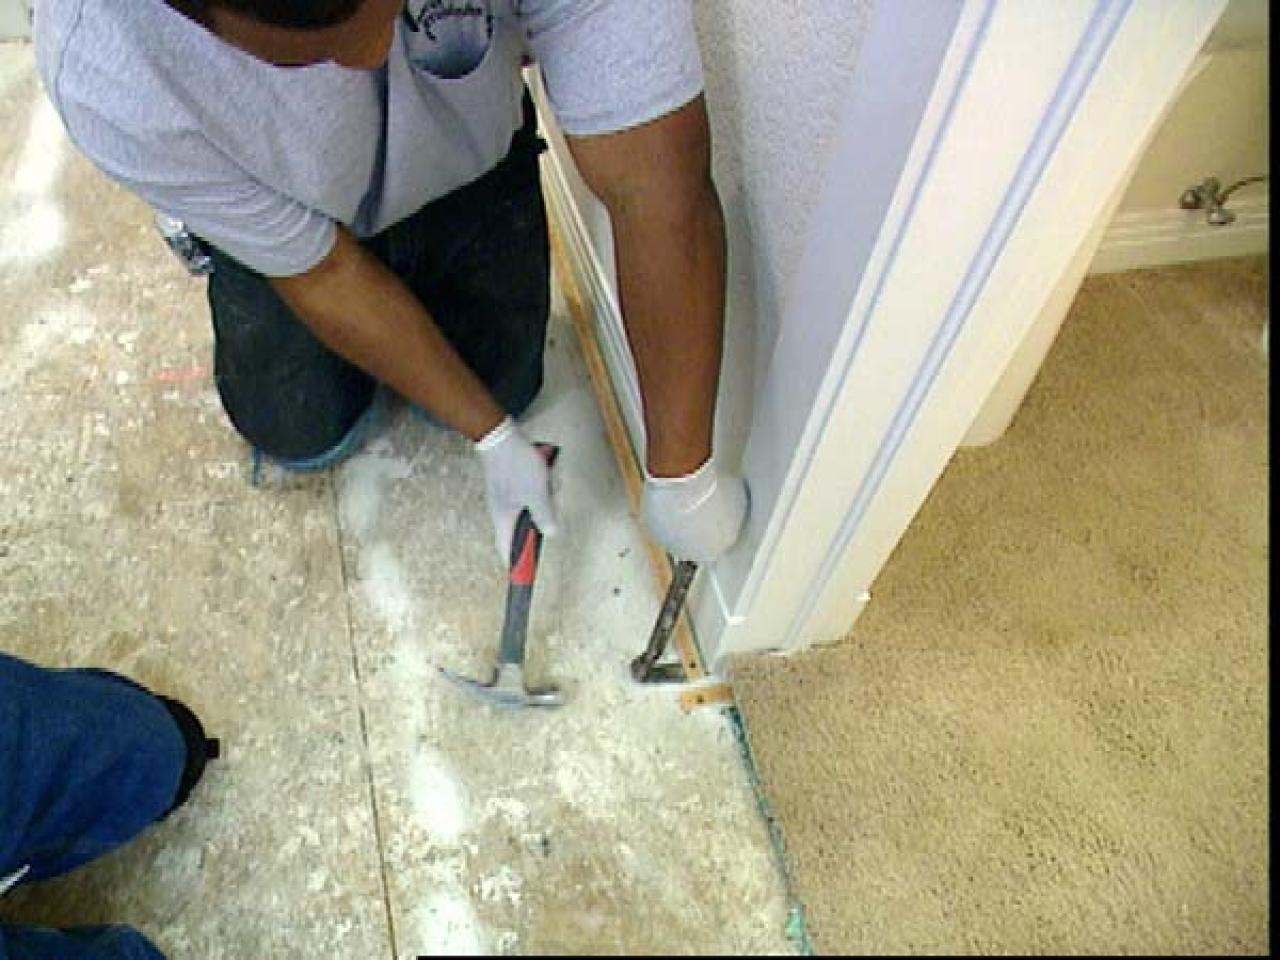 How To Install Tile Flooring Tos, Cost To Replace Tile Floor